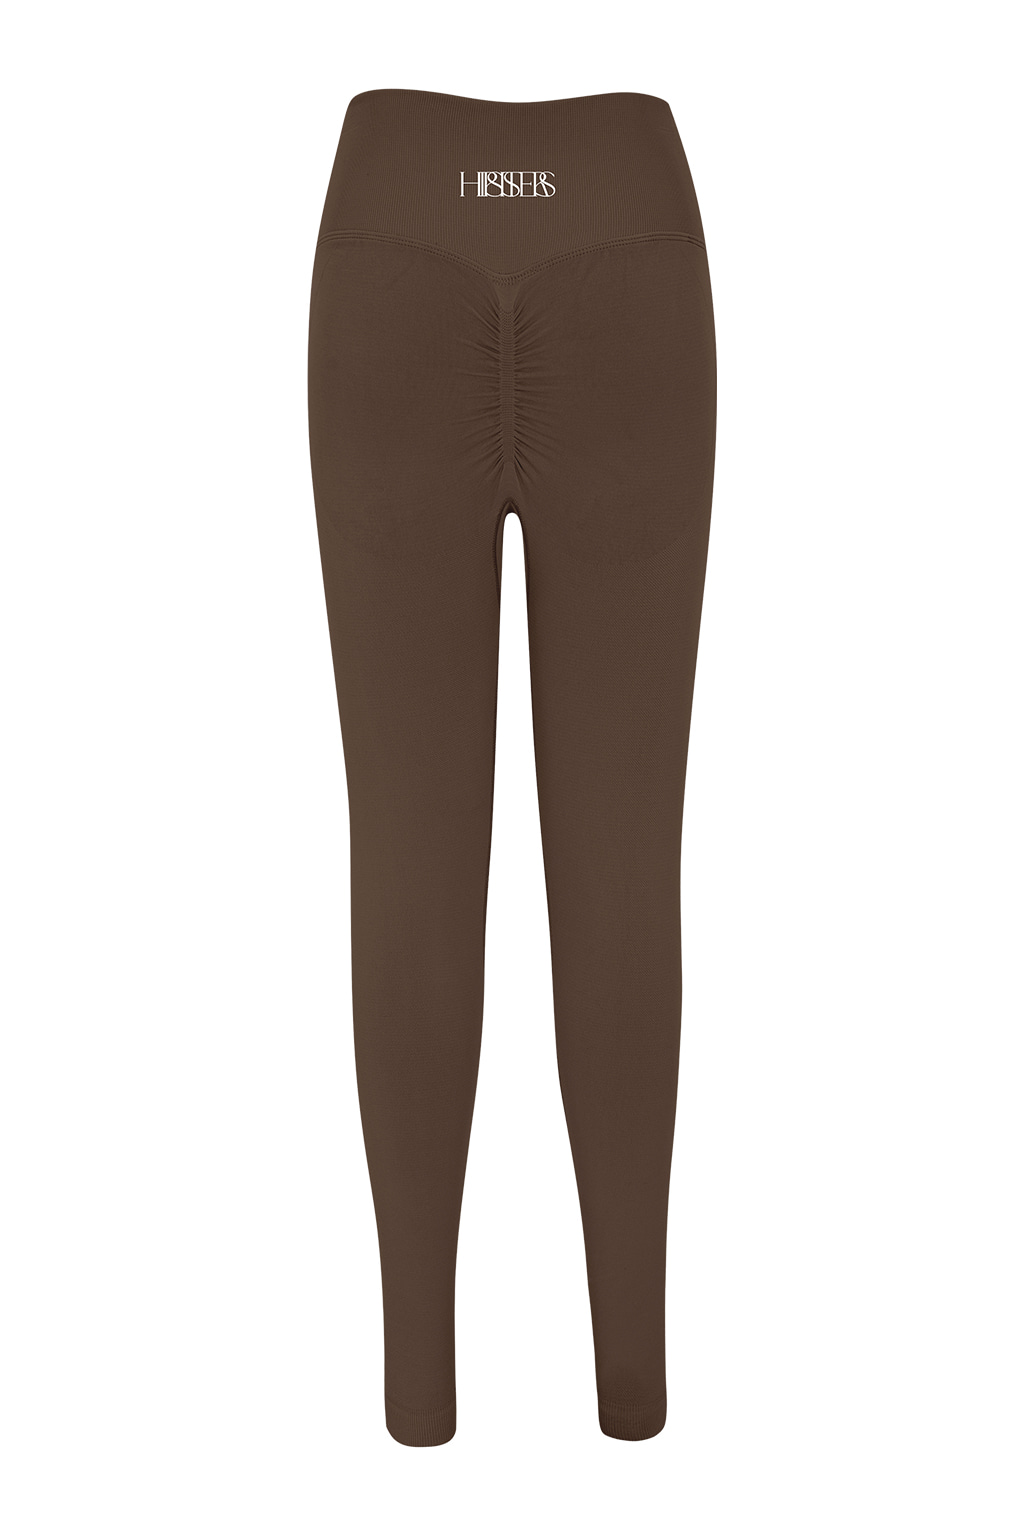 All Day Leggings Coffee Brown